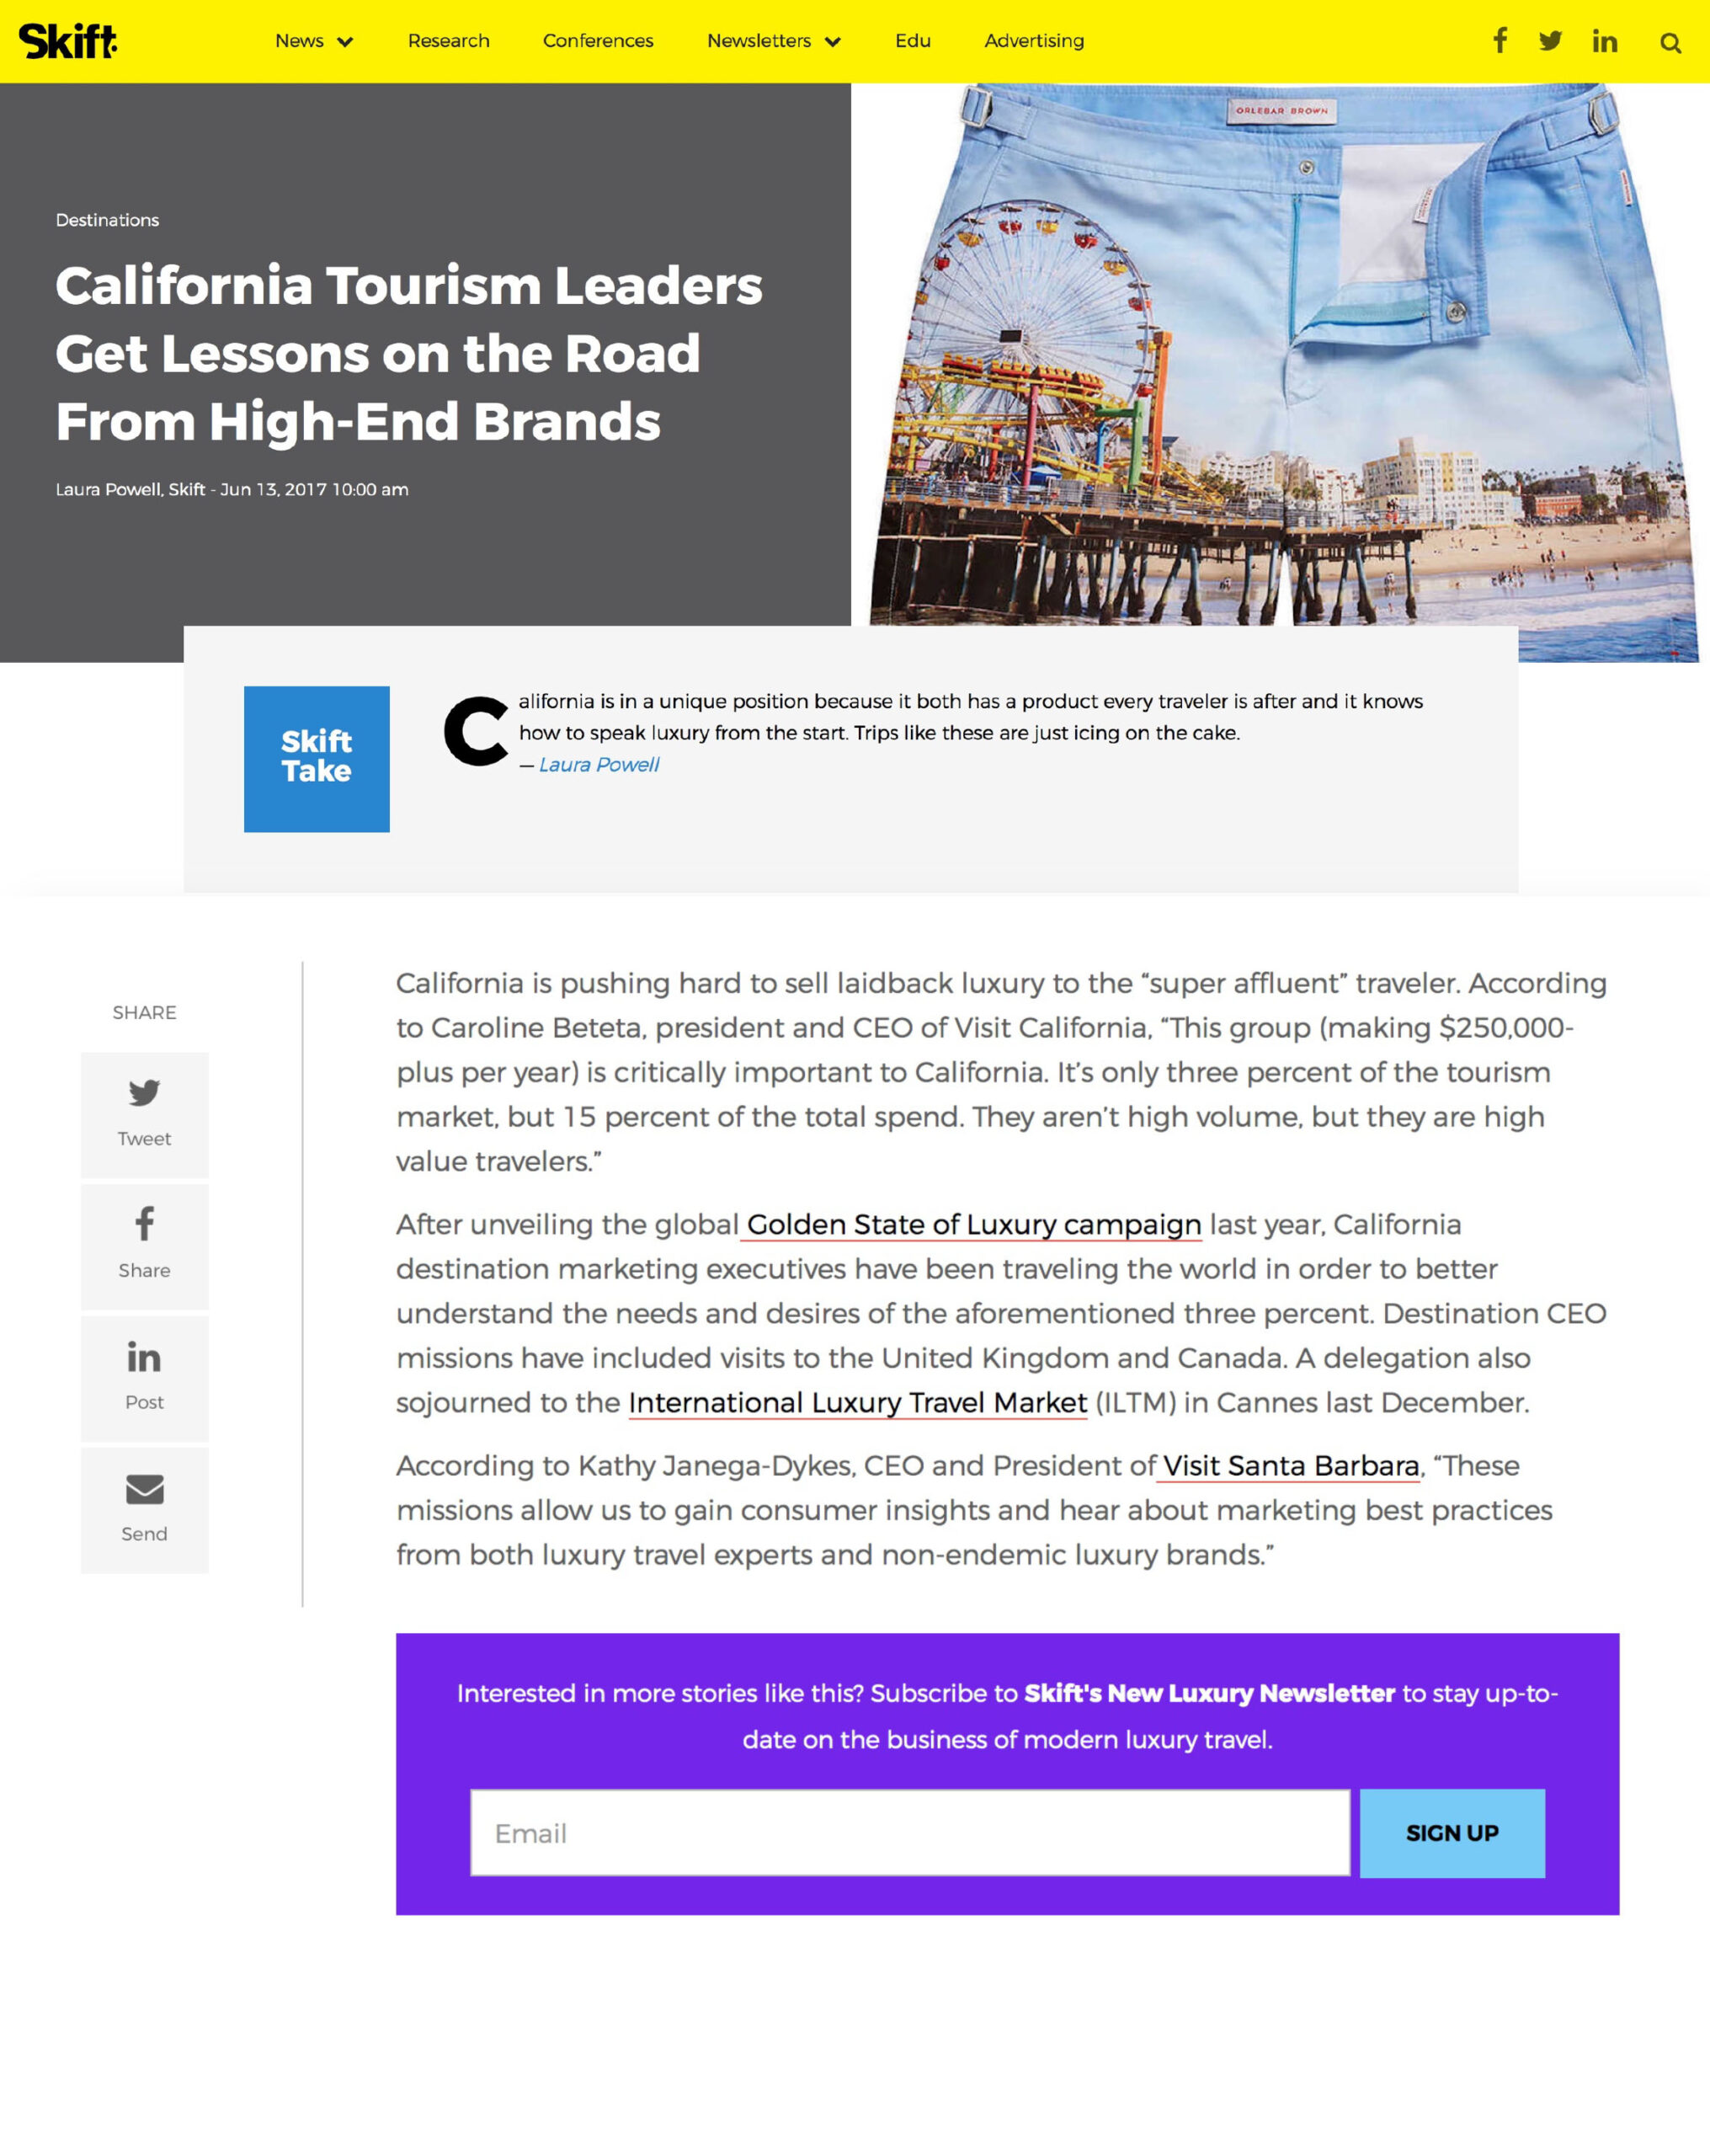 California Tourism Leaders Get Lessons on the Road from High-End Brands